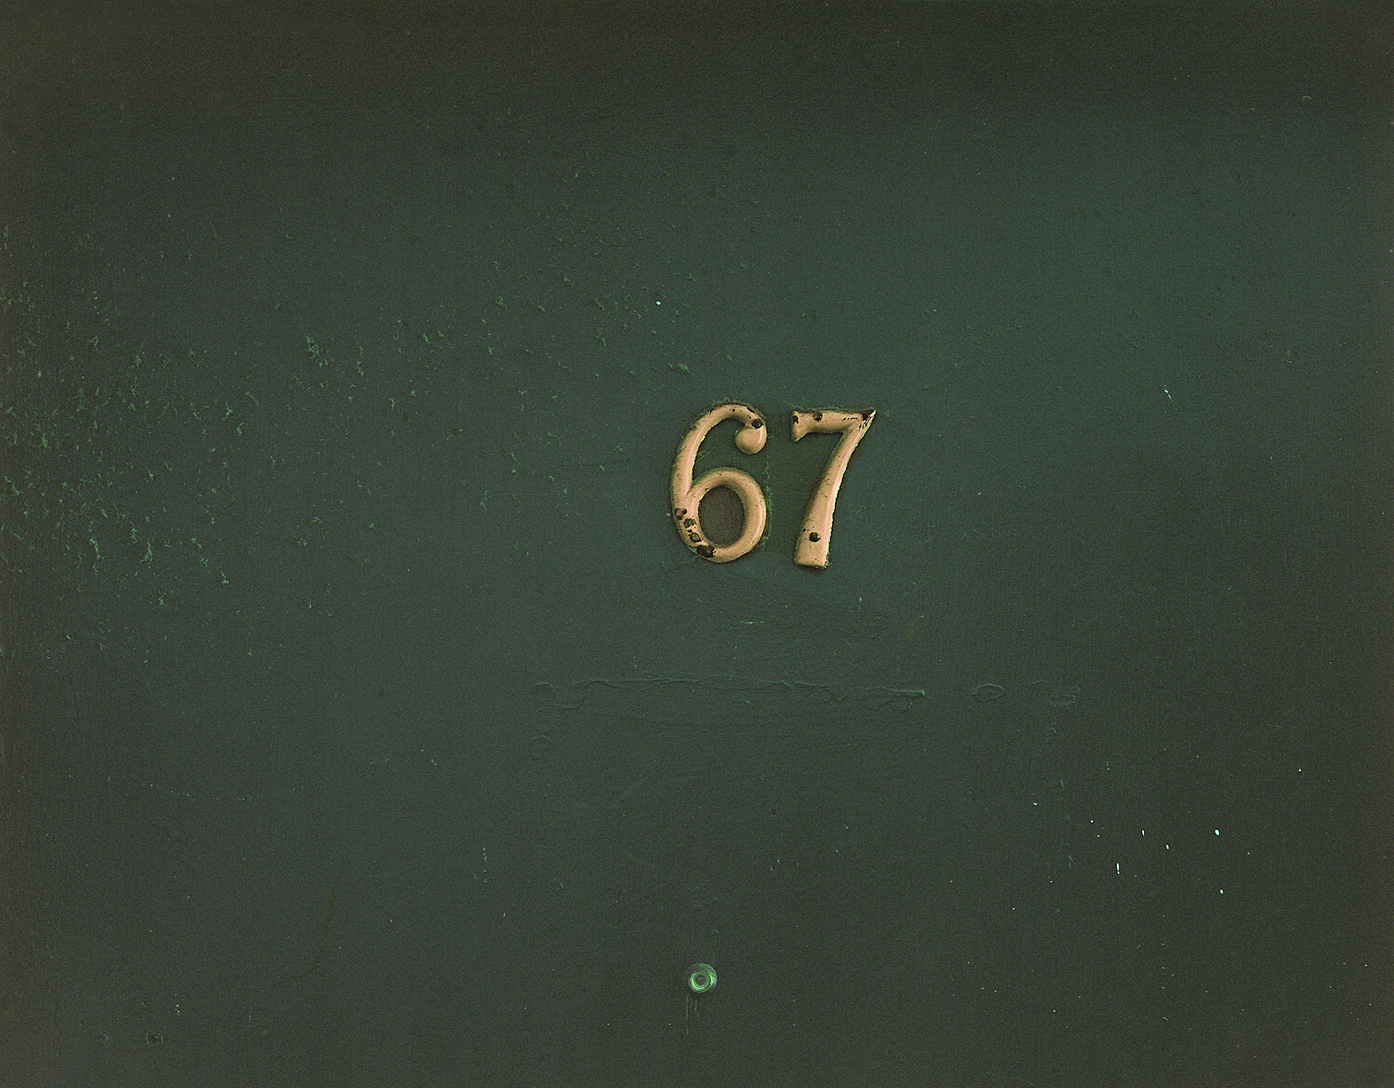 Lise Sarfati — the green door, the peephole and the number